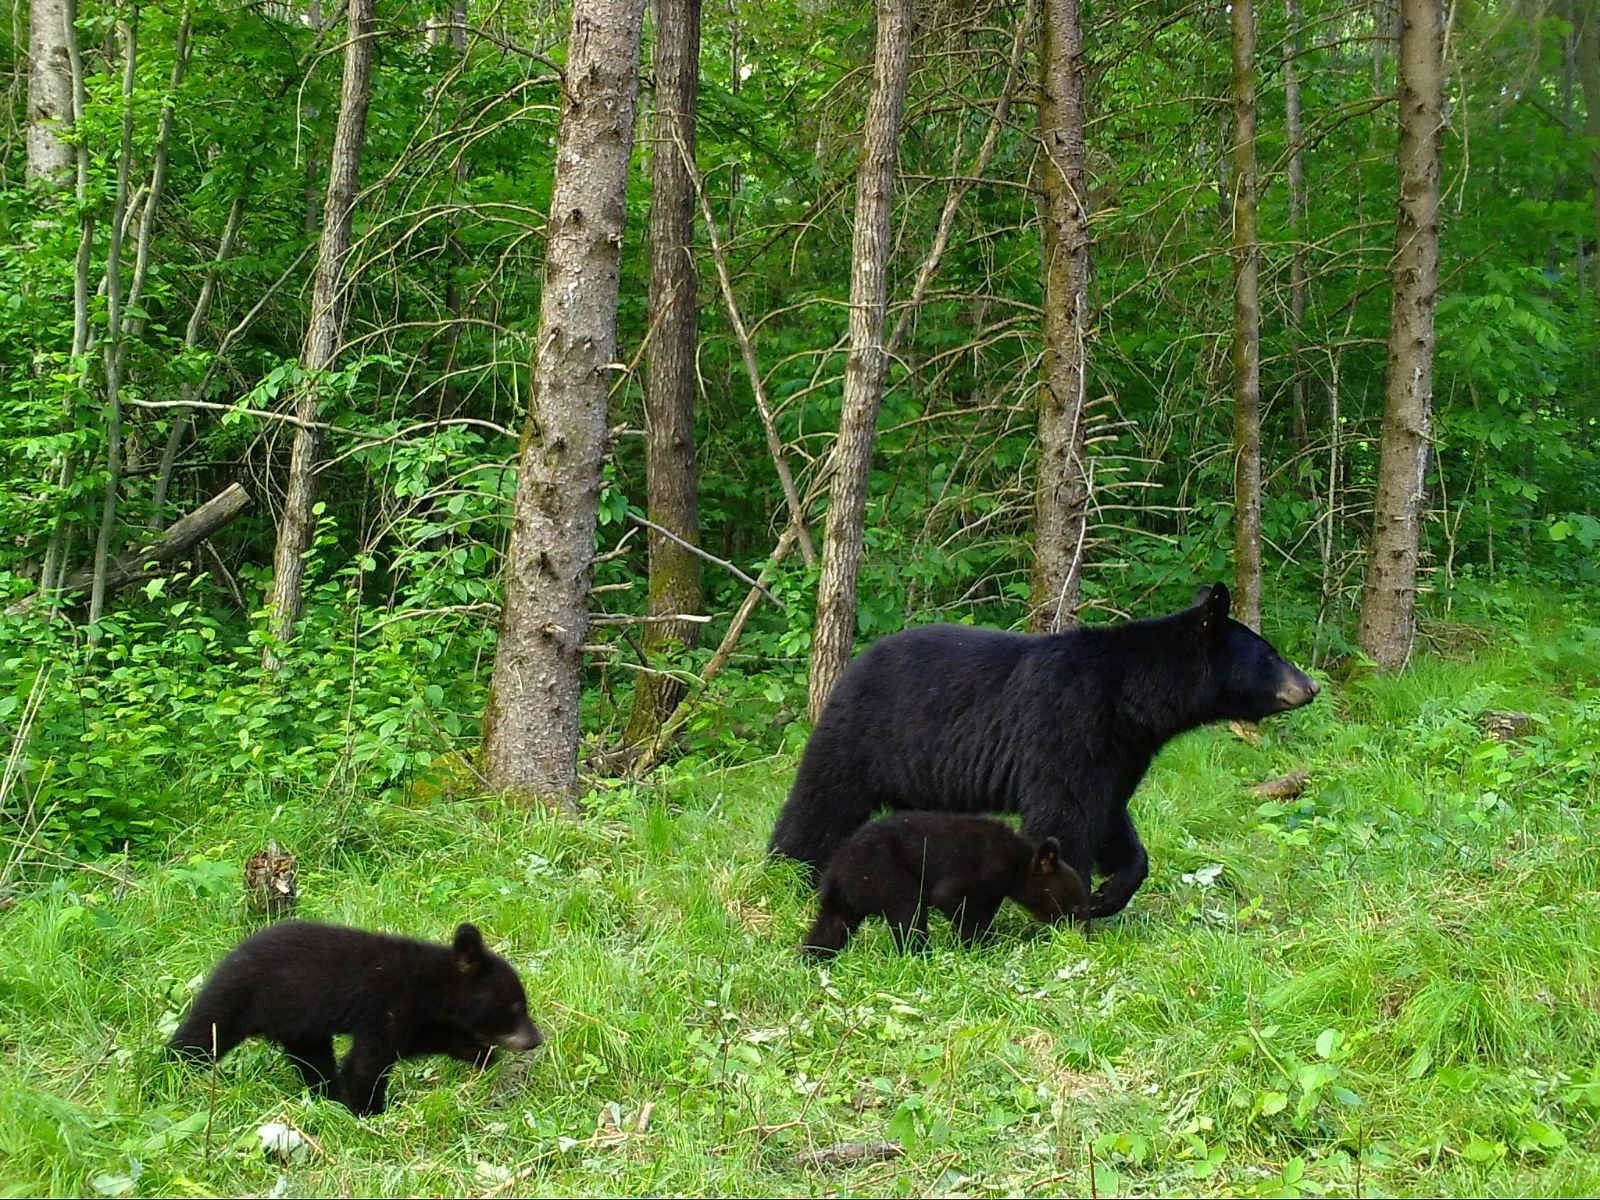 An image of a black bear sow 